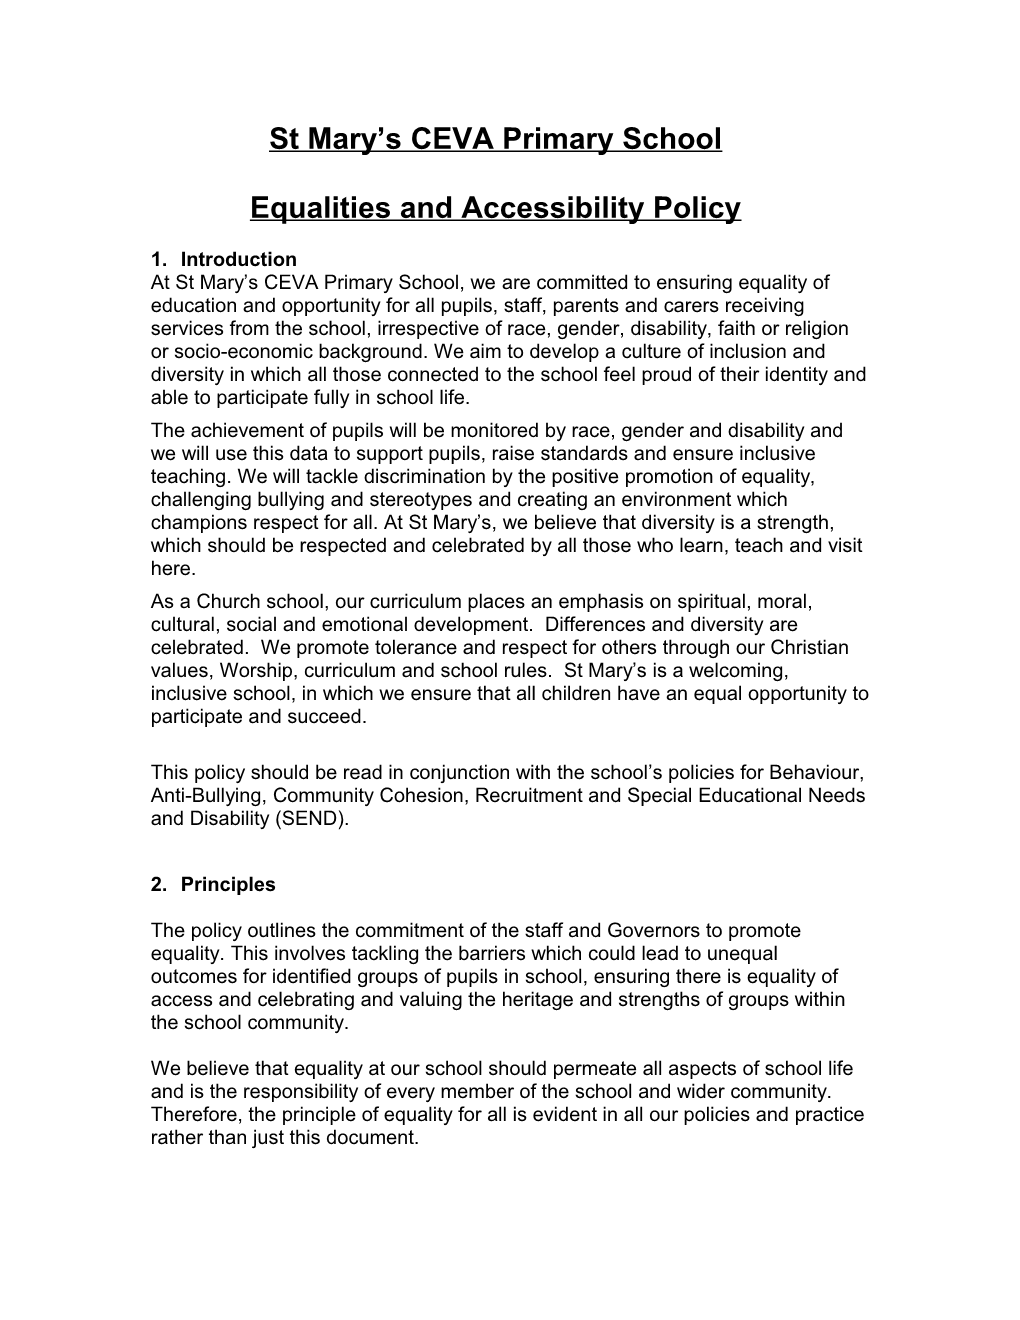 Equalities and Accessibility Policy